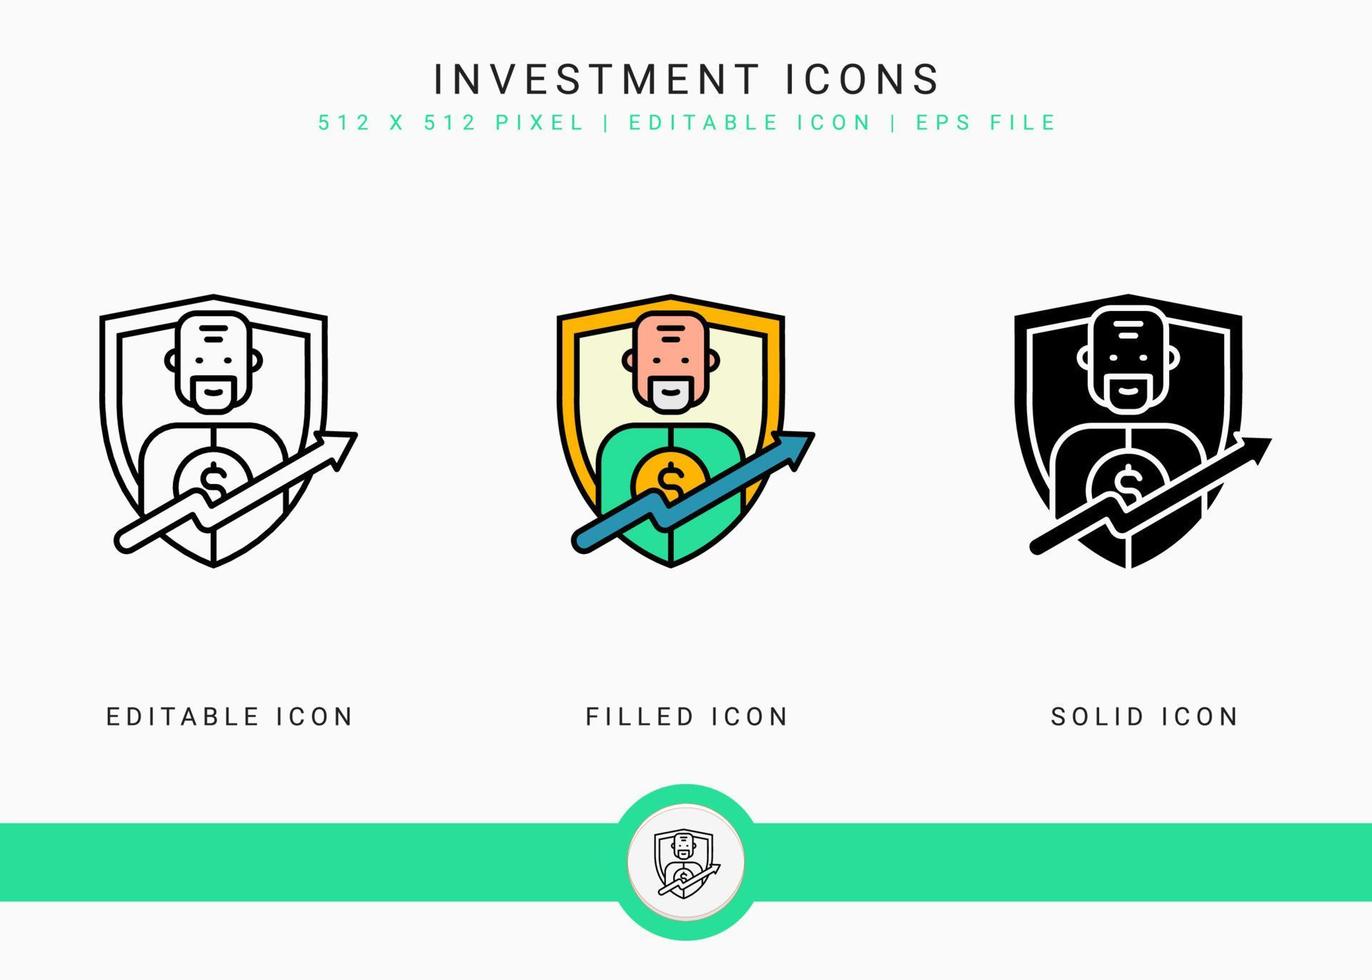 Investment icons set vector illustration with icon line style. Pension fund plan concept. Editable stroke icon on isolated white background for web design, user interface, and mobile application